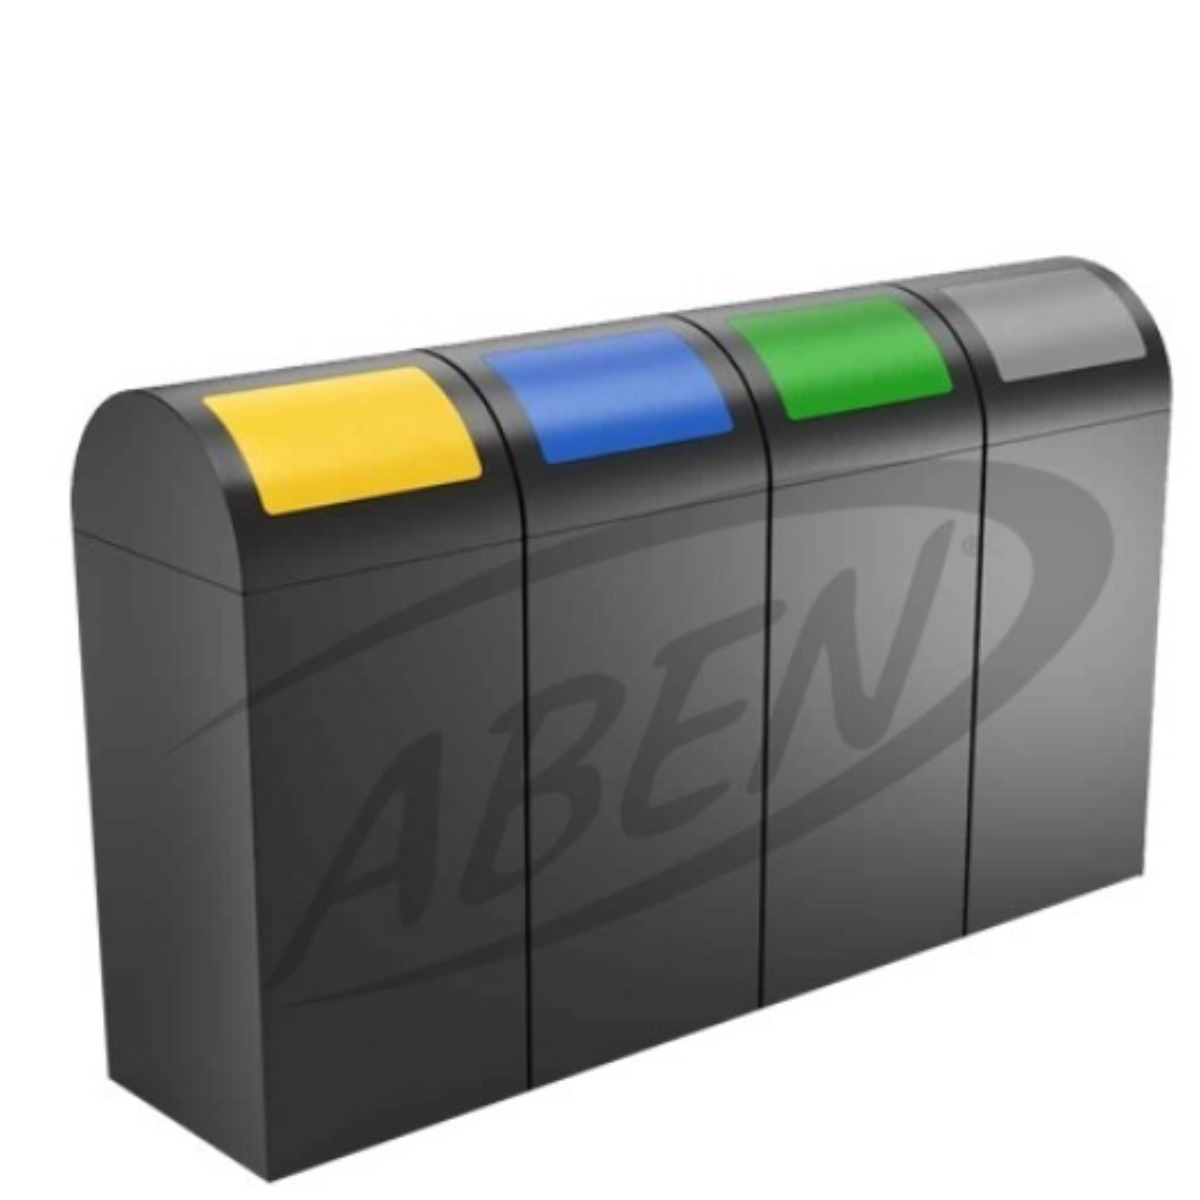 AB-761 4’Part Recycle Bin product logo